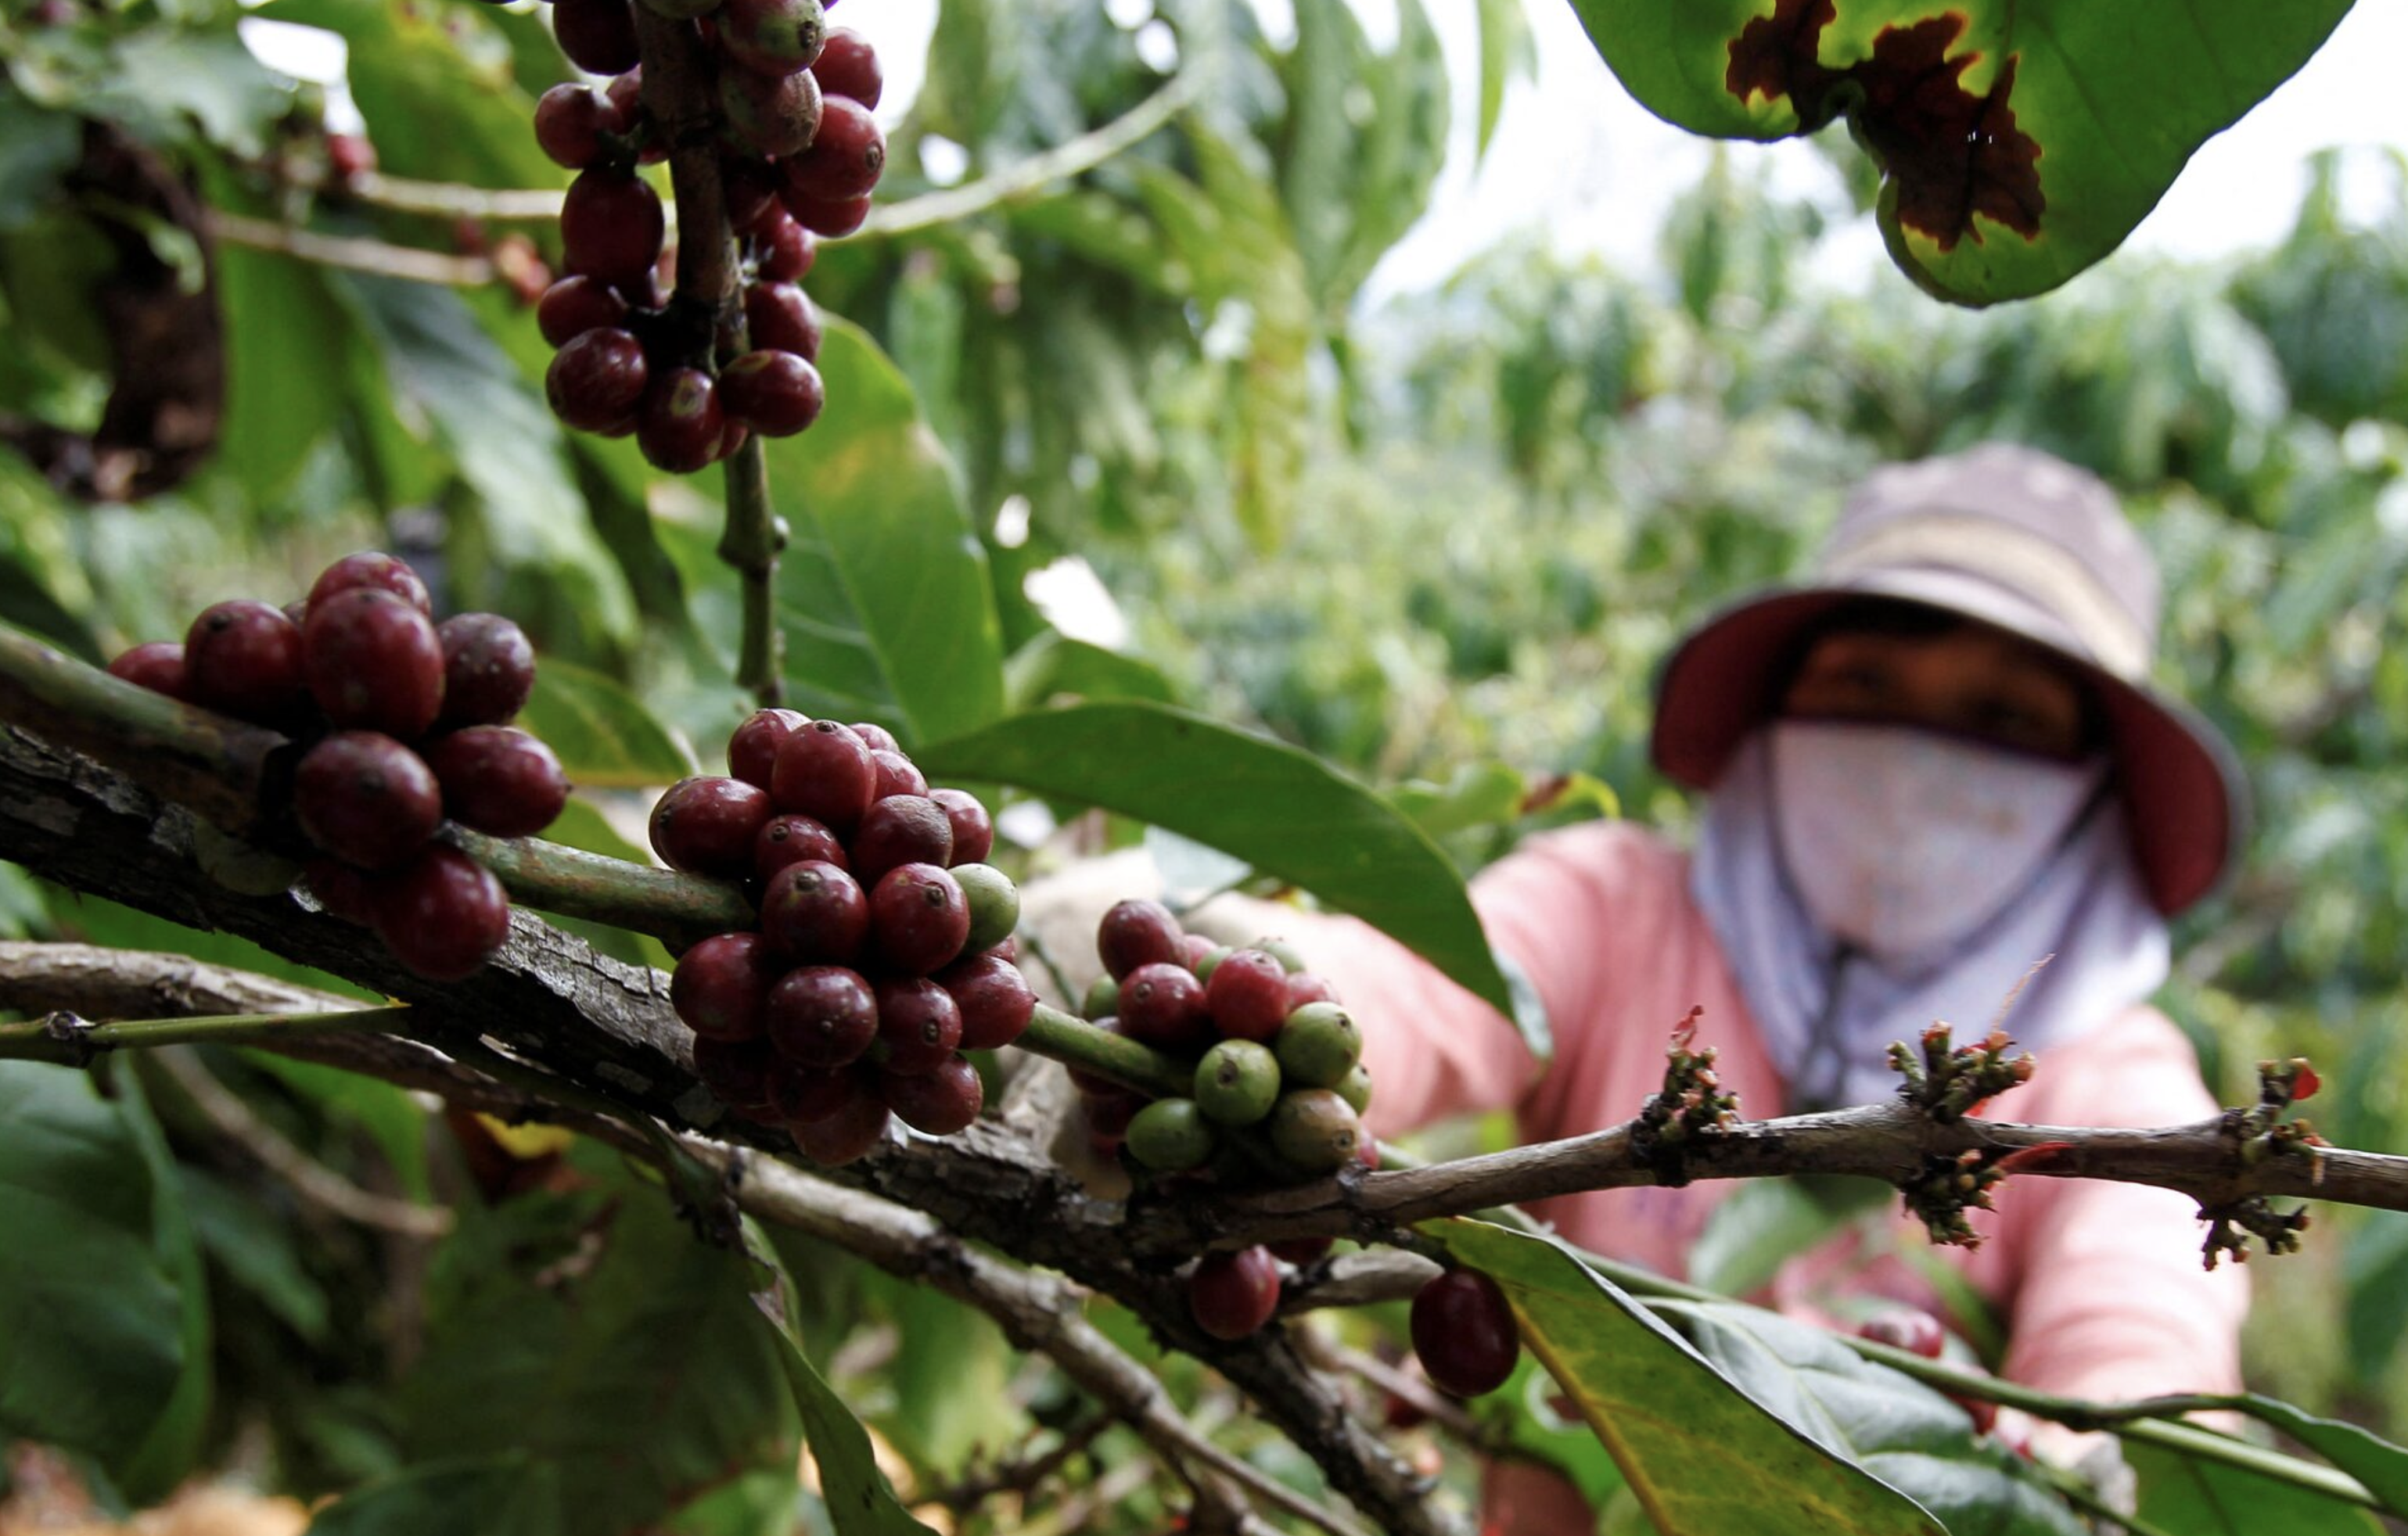 Vietnam coffee farmers boost irrigation but running low on water, says report